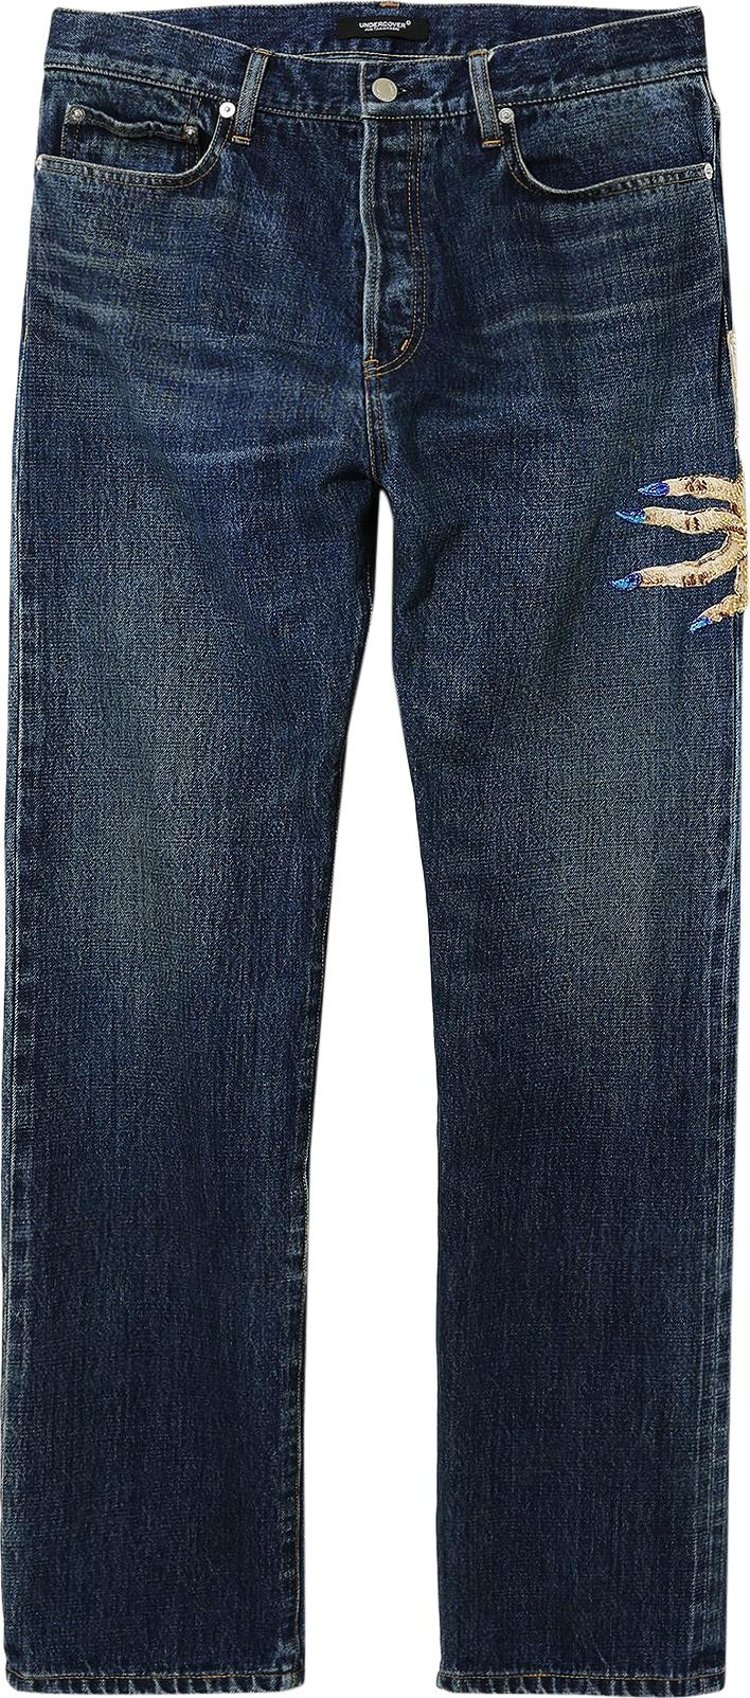 Buy Undercover Embroidered Patch Jeans 'Indigo' - UC2C4509 2 INDI | GOAT